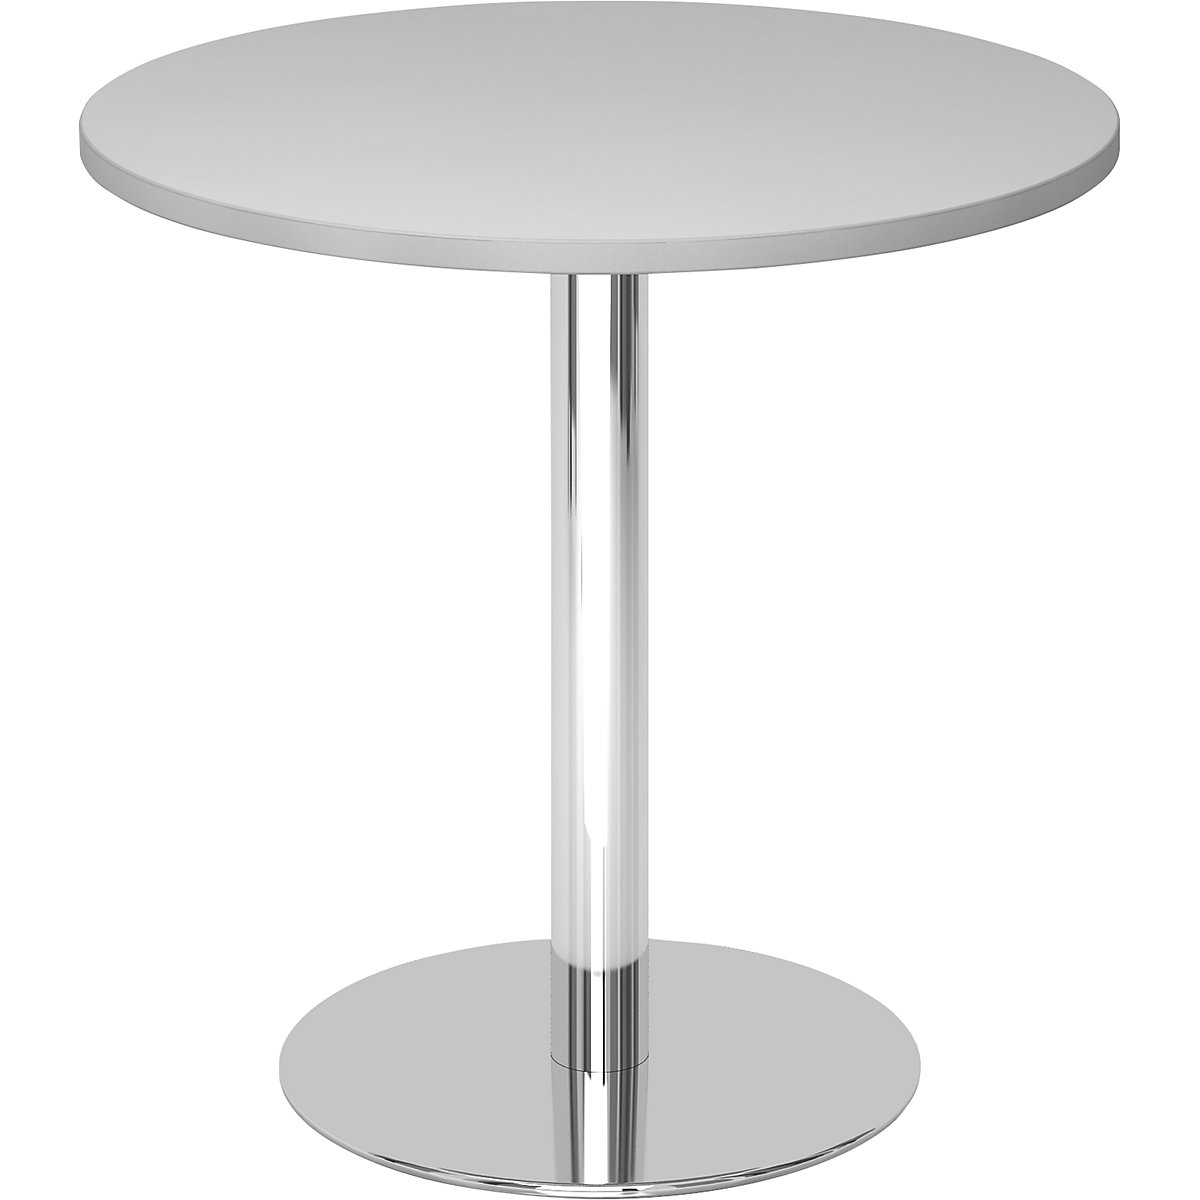 Conference table, Ø 800 mm, 755 mm high, chrome plated frame, tabletop in light grey-5